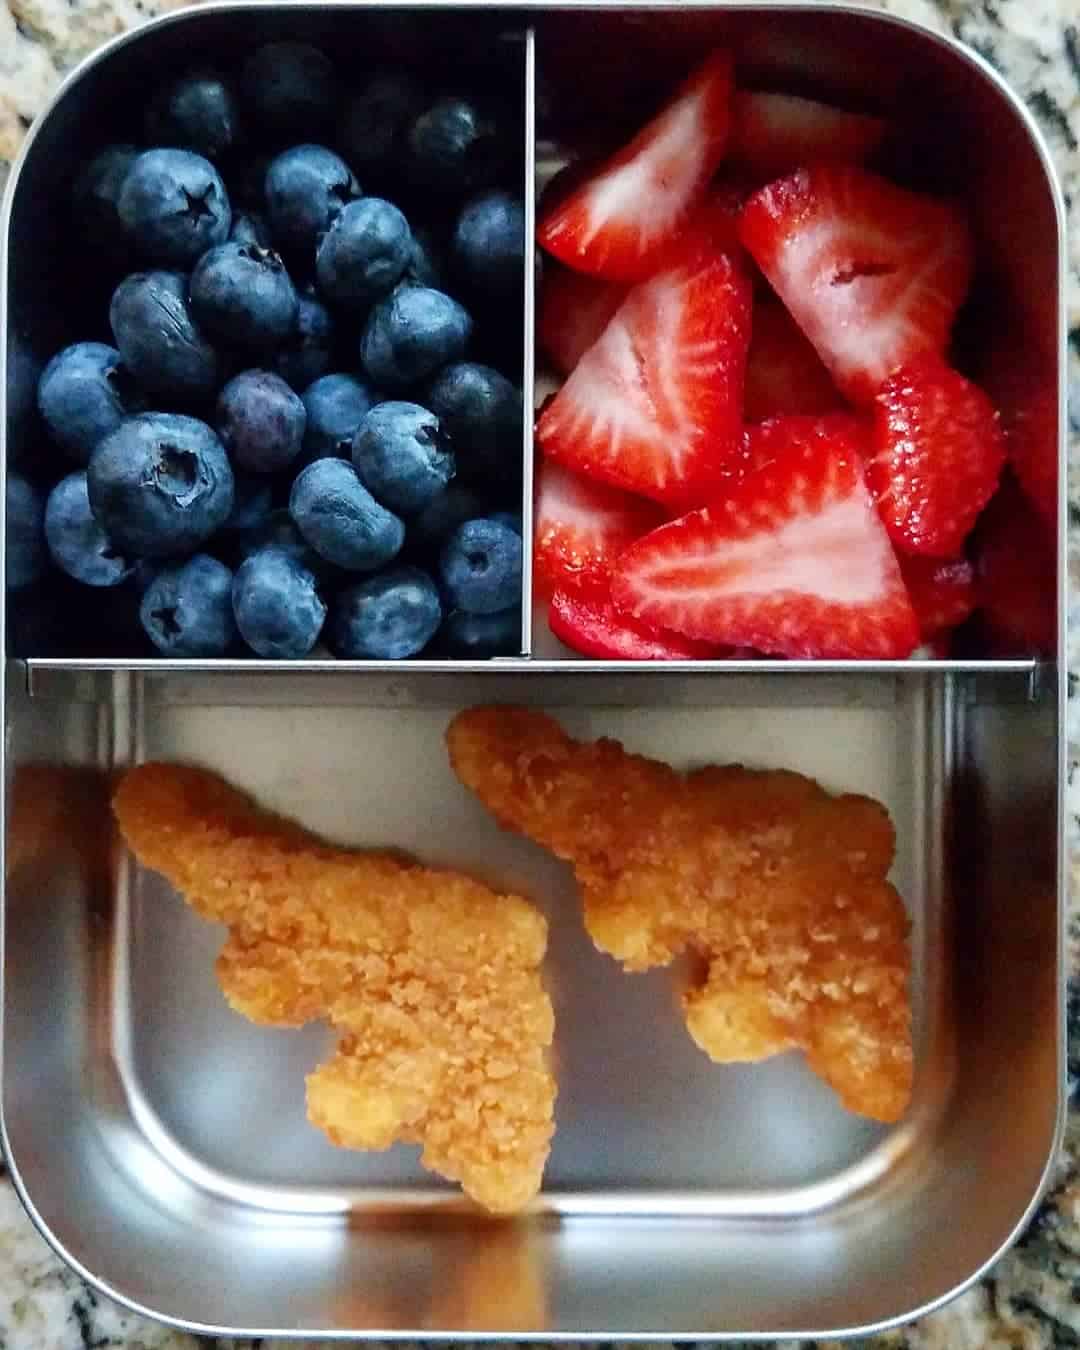 Chicken nuggets and berries